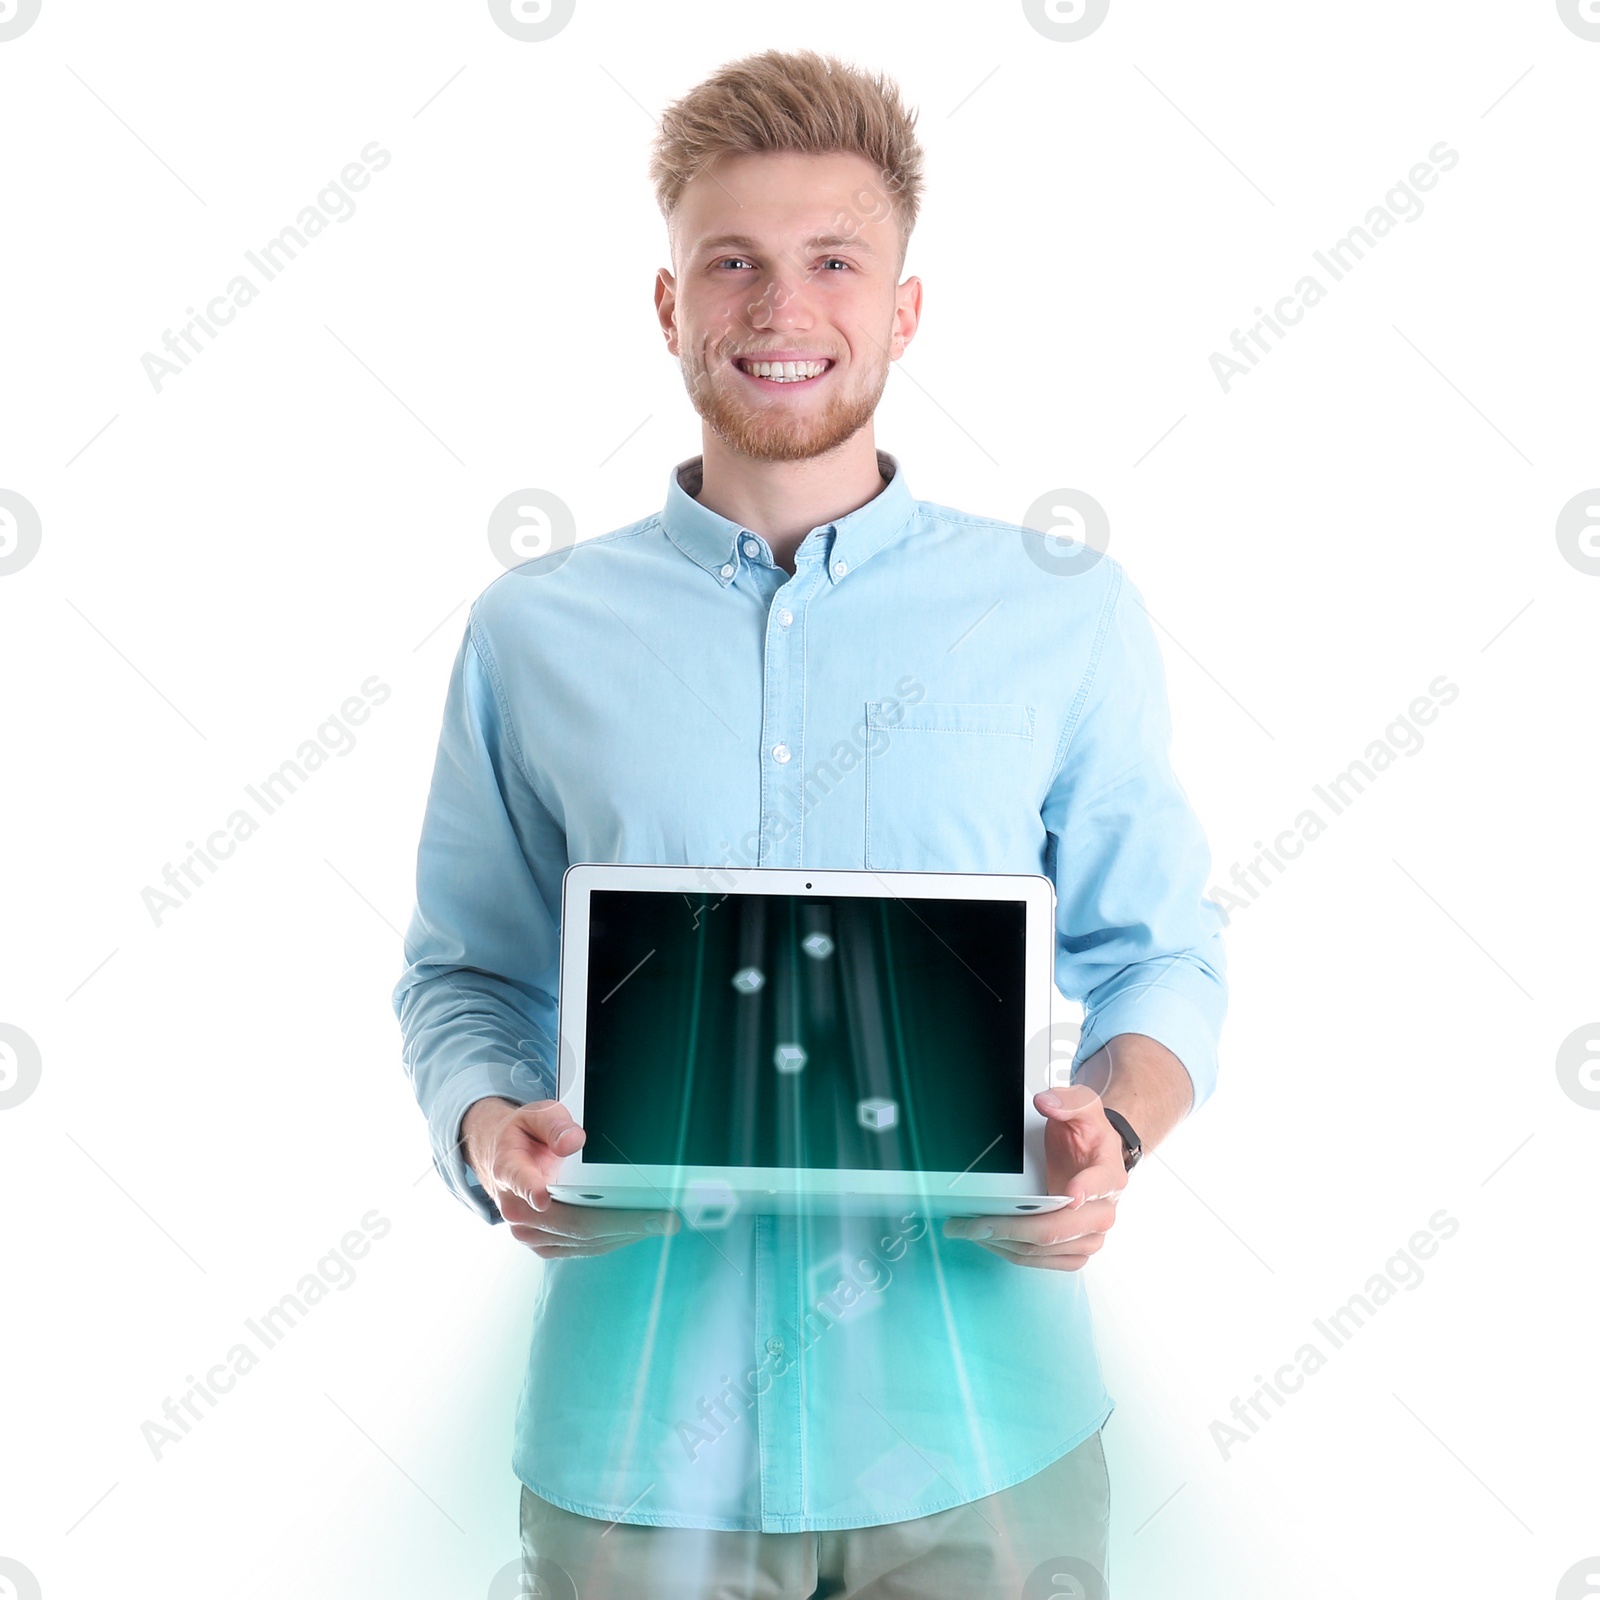 Image of Speed internet. Man with laptop on white background. Motion blur effect symbolizing fast connection